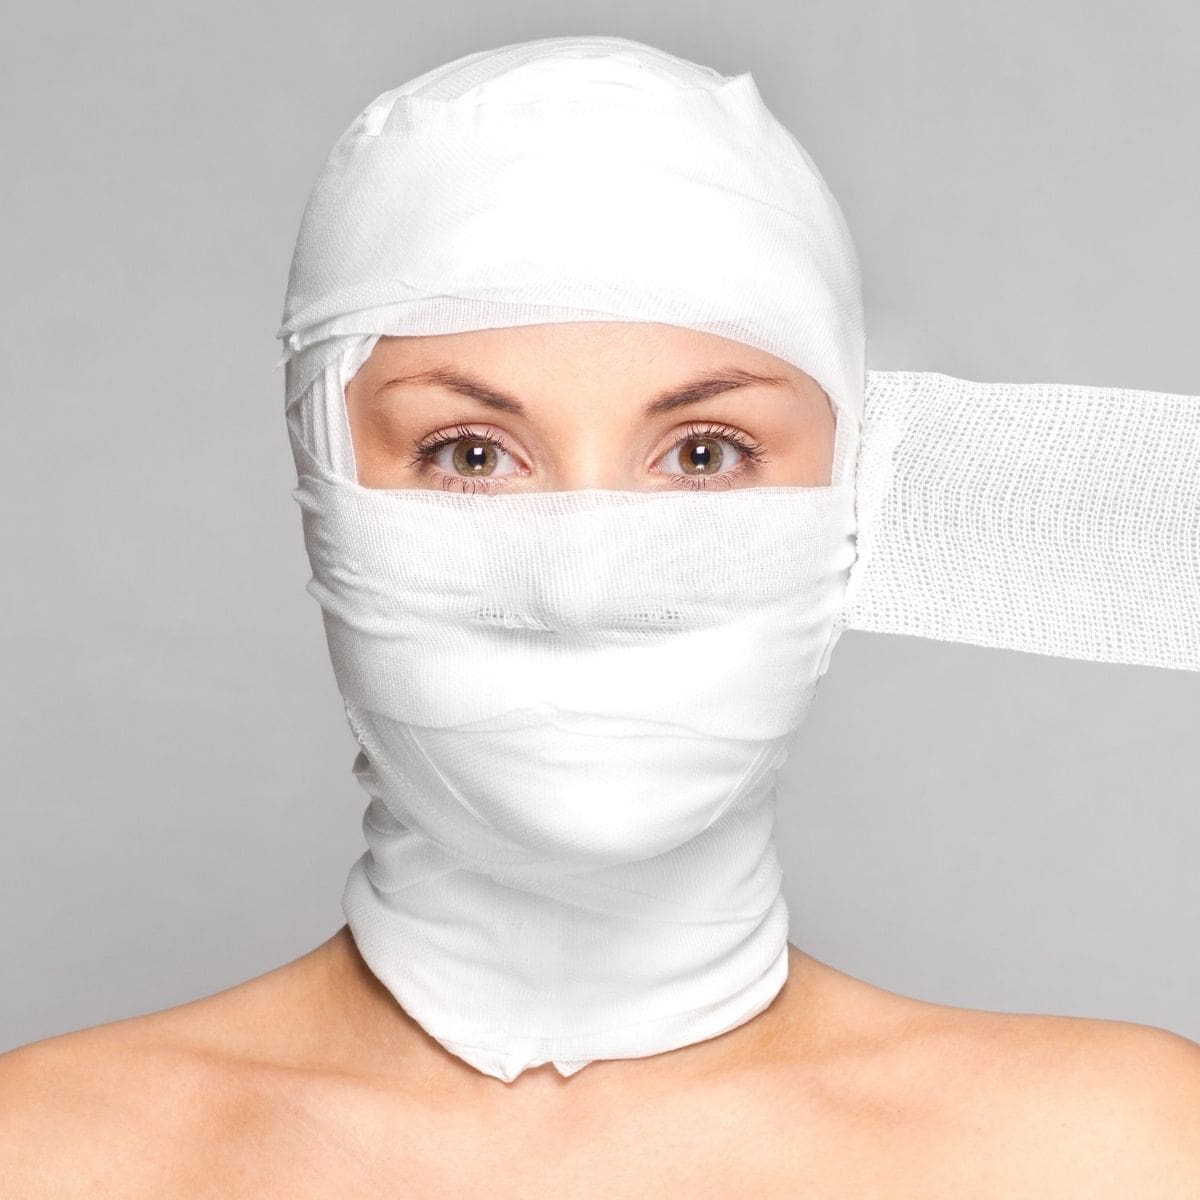 3 Reasons to Say NO to Plastic Surgery and Cosmetic Procedures